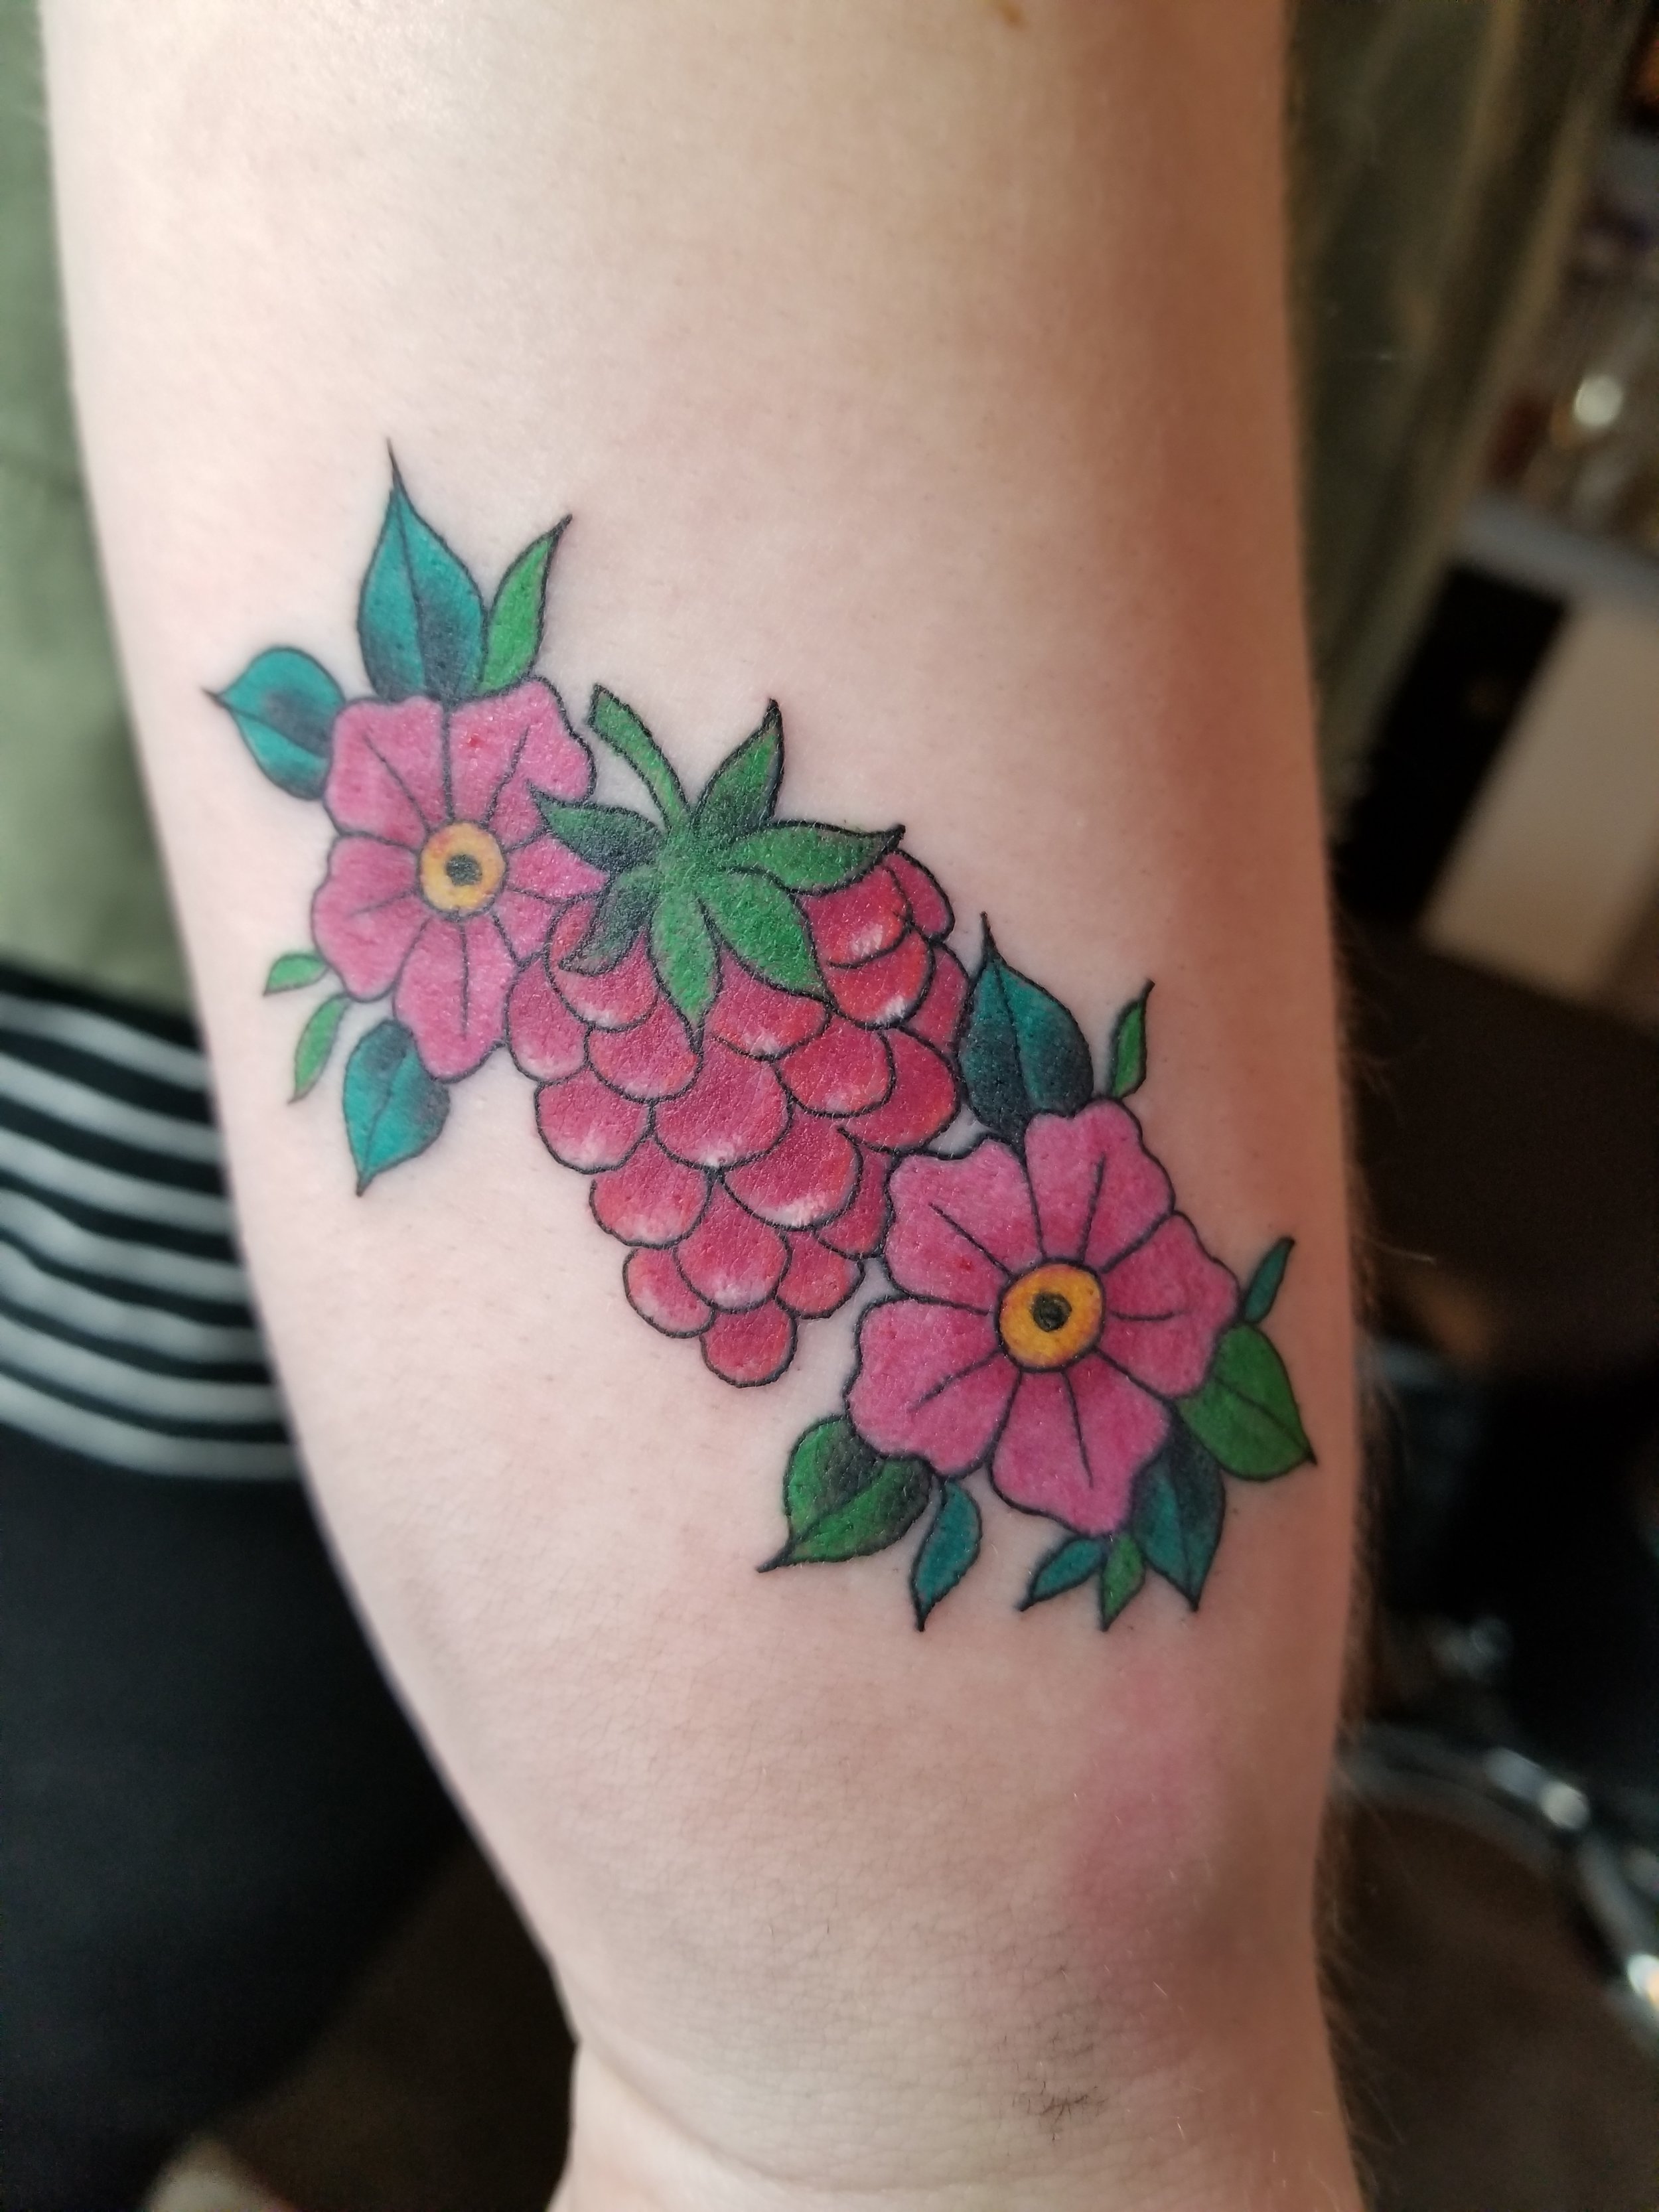 Raspberry and flowers